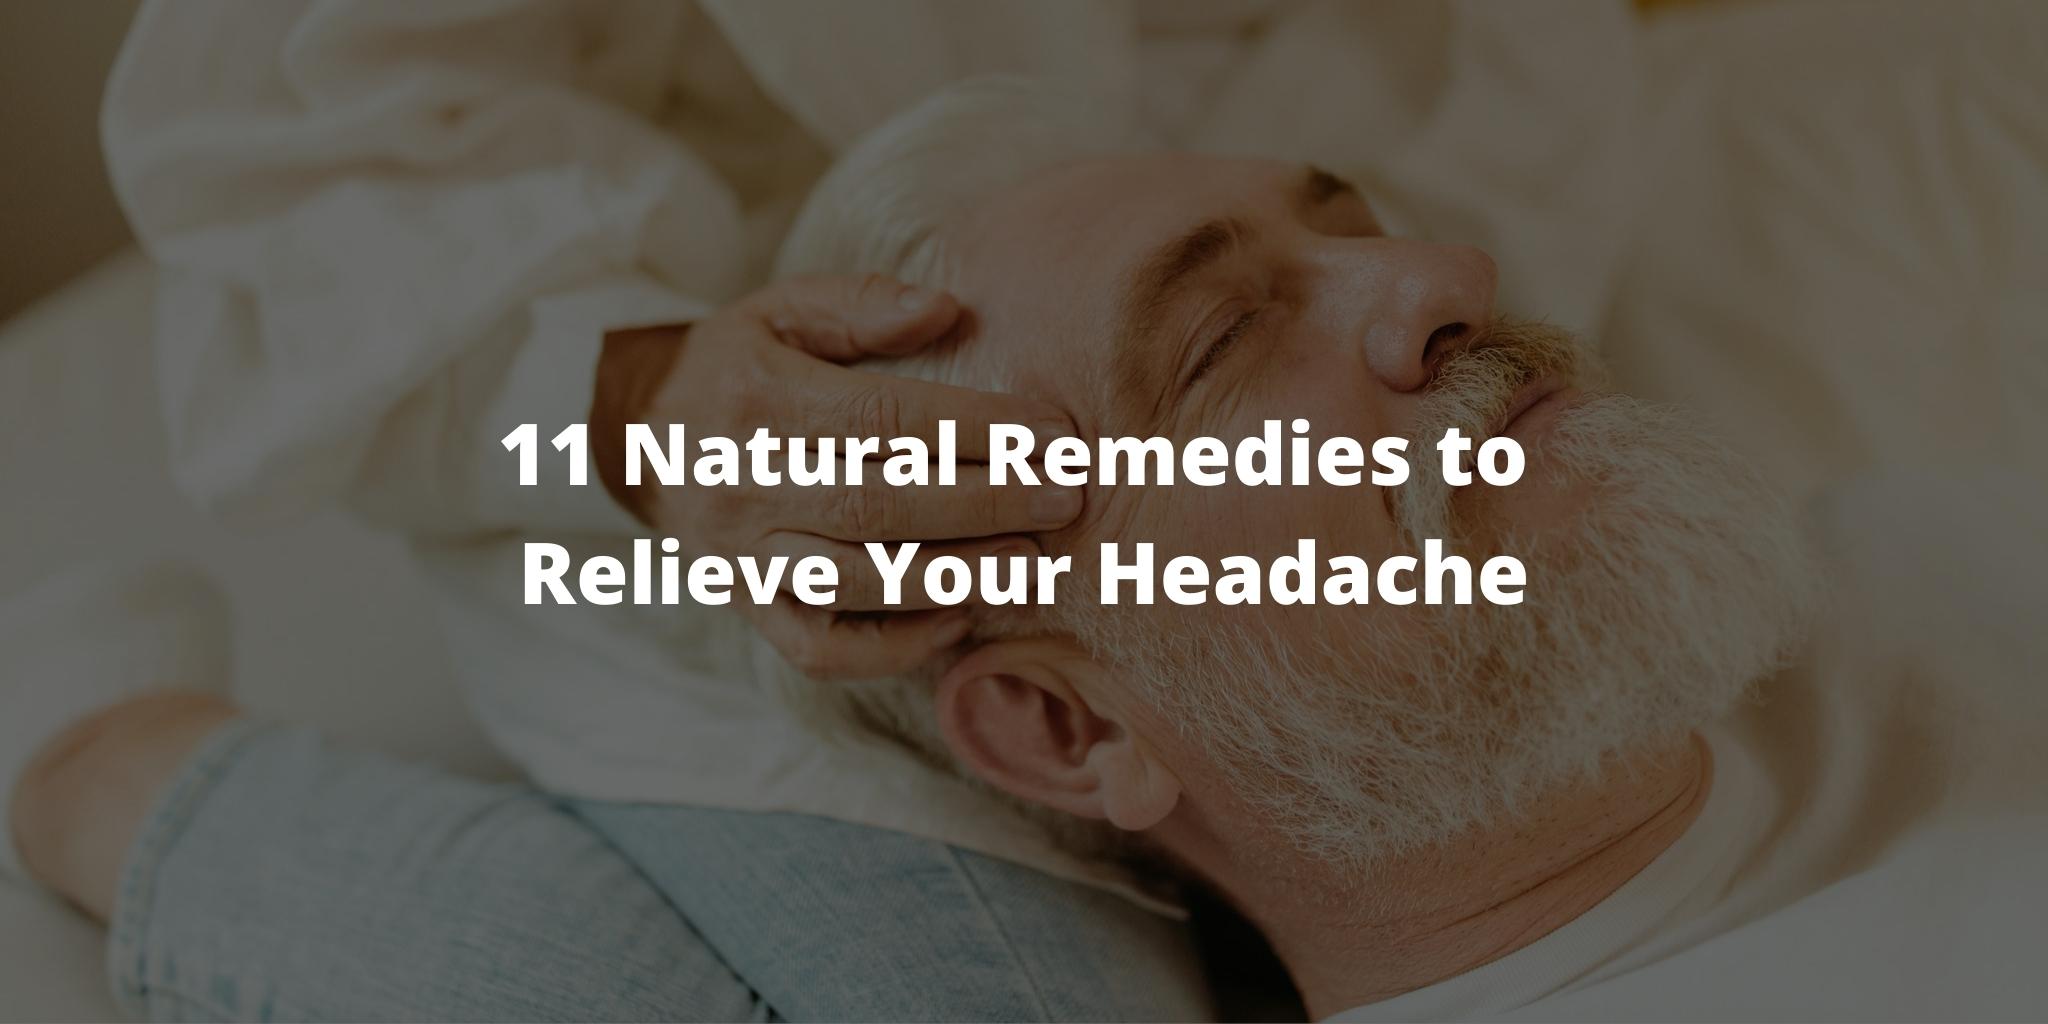 11 Natural Remedies to Relieve Your Headache